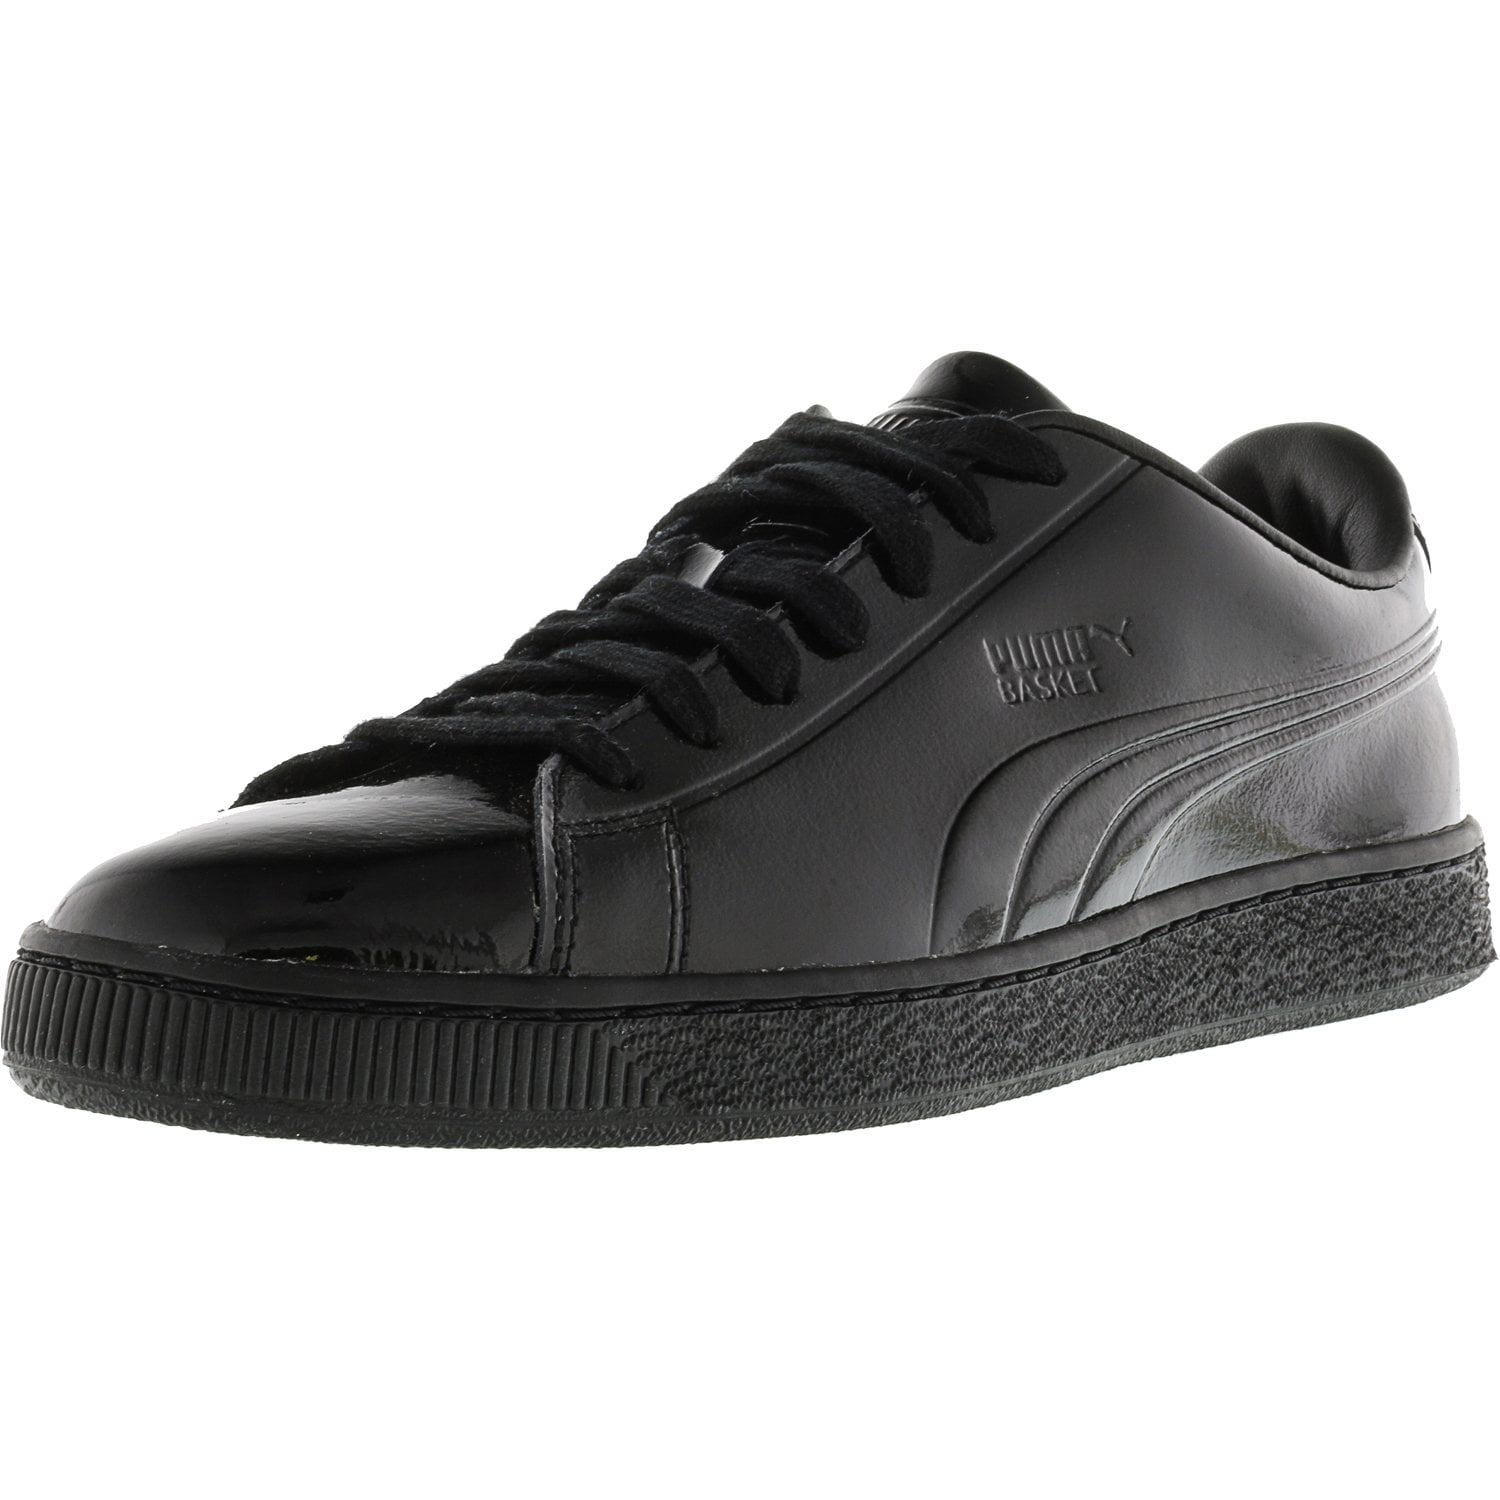 Puma Men's Basket Classic Patent Emboss Black Ankle-High Leather ...